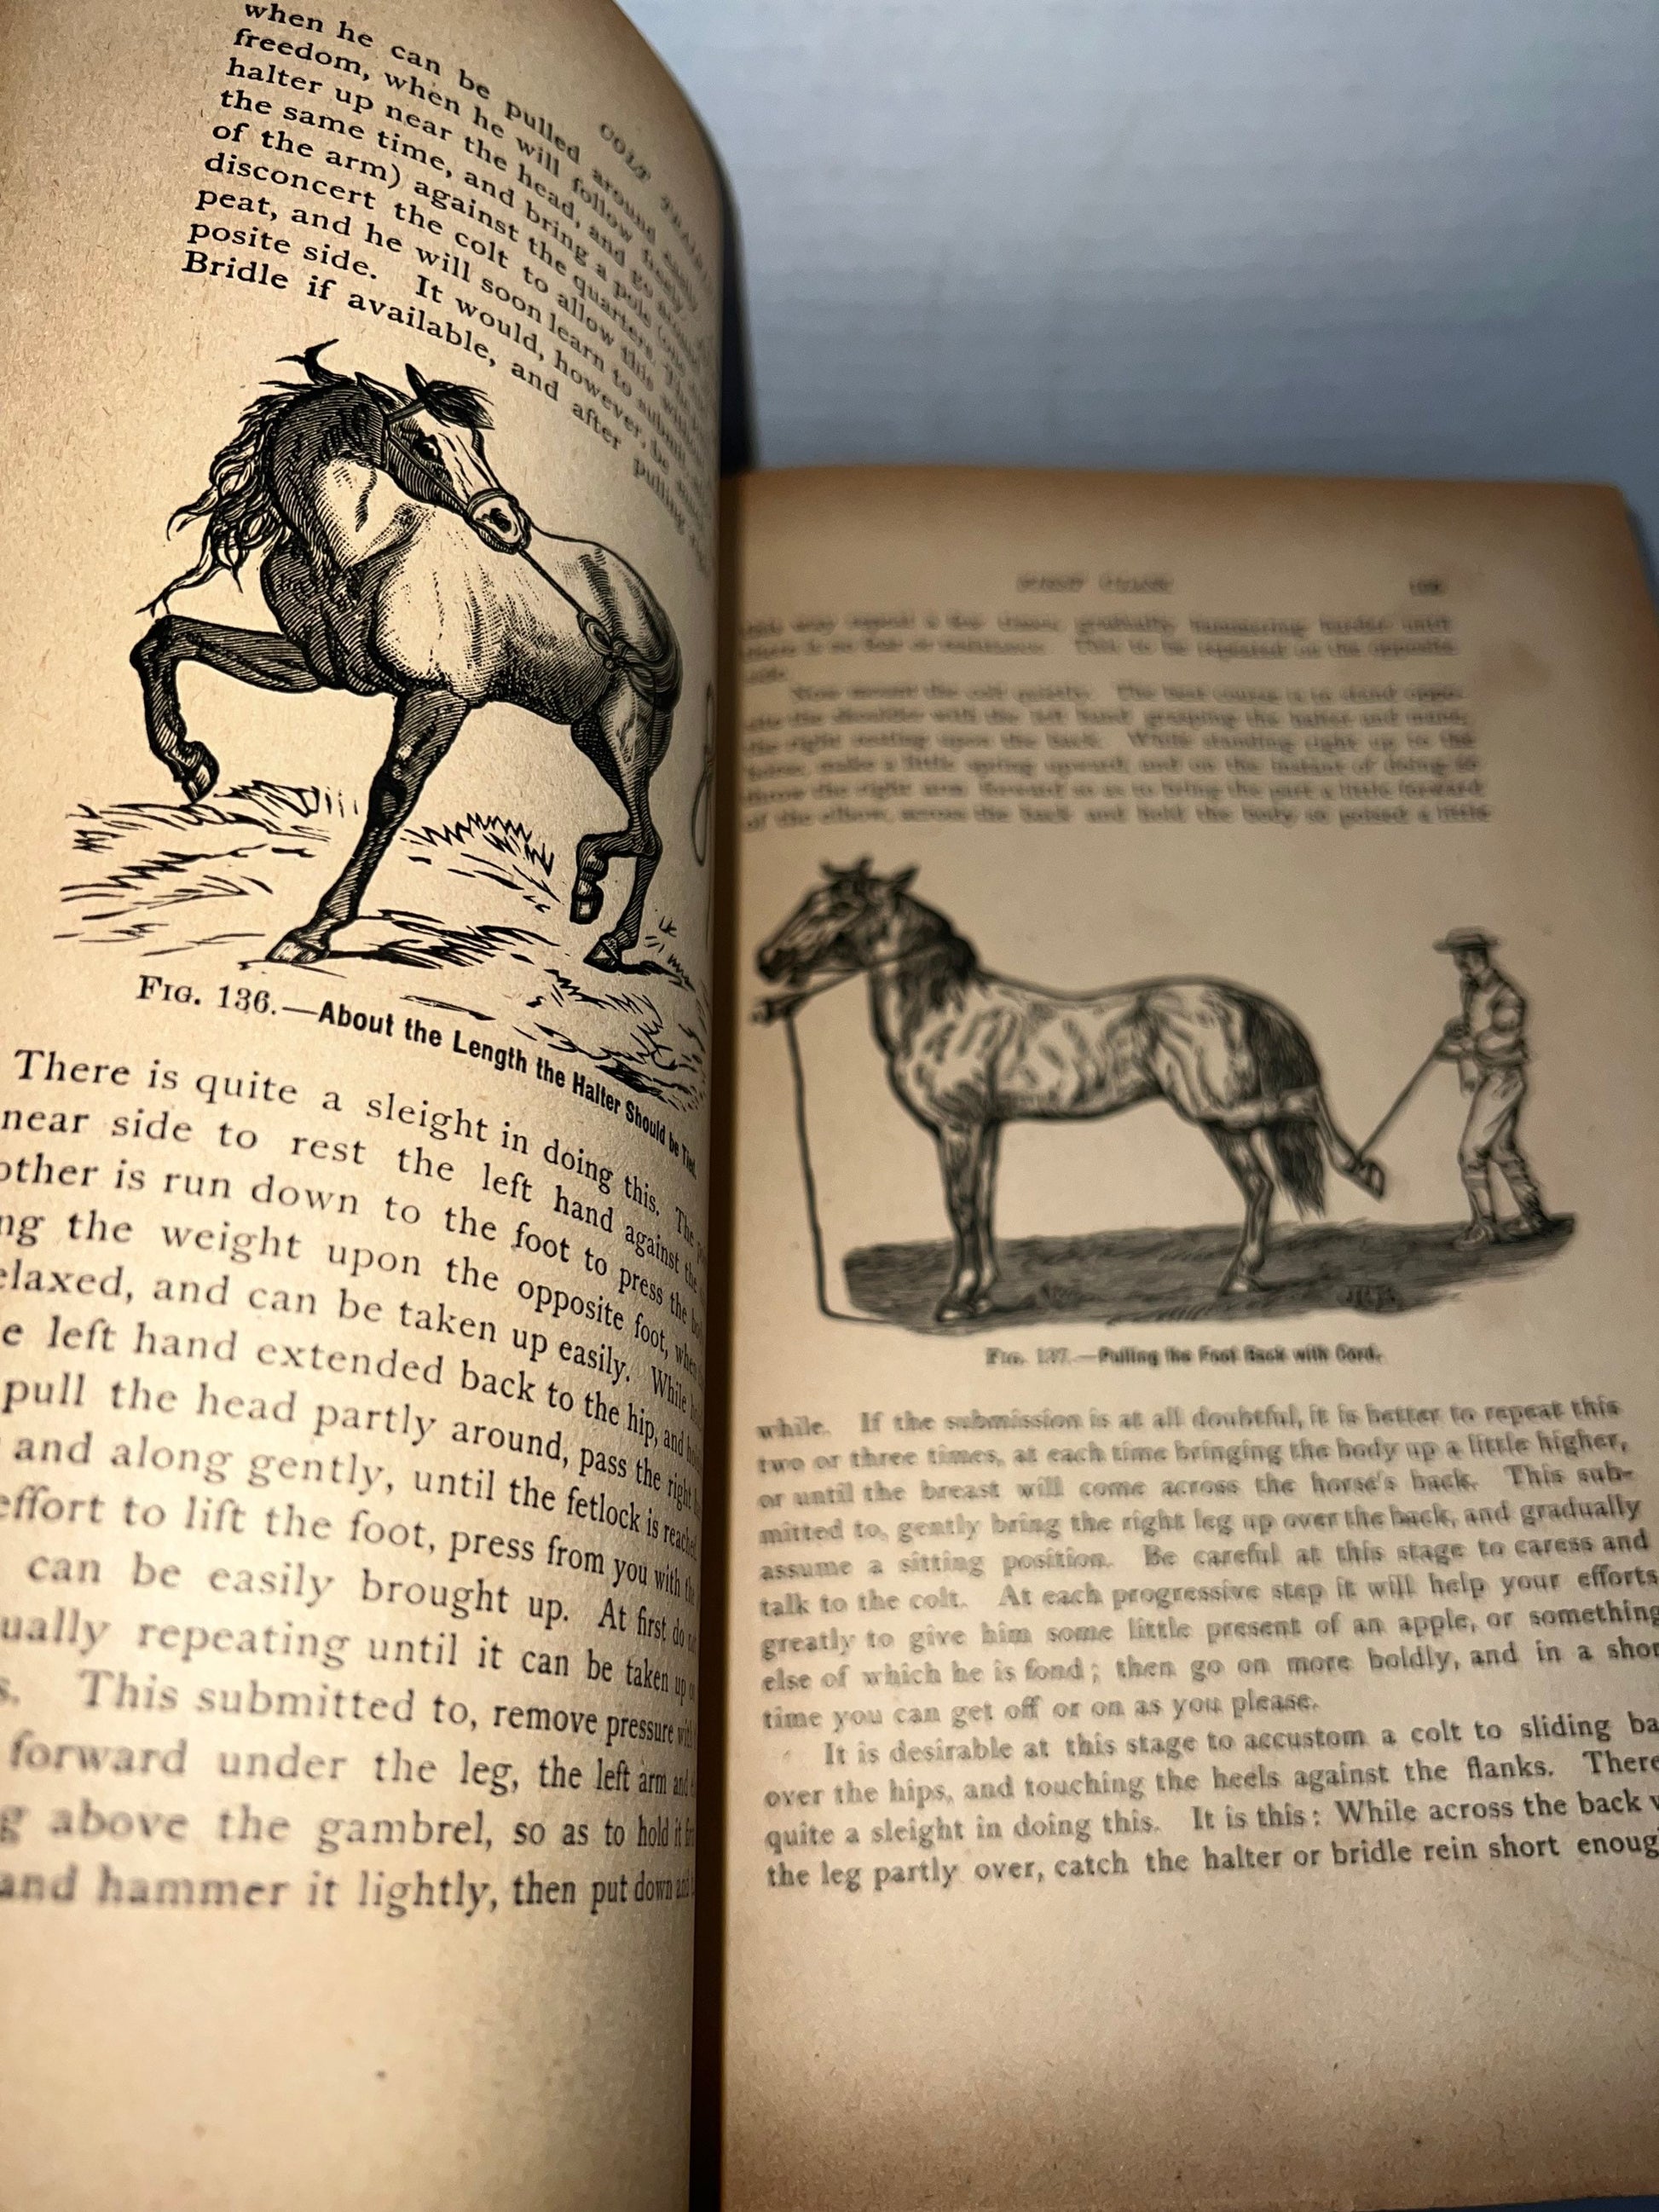 Antique magner’s standard horse and stock book equestrian 1905 profusely illustrated